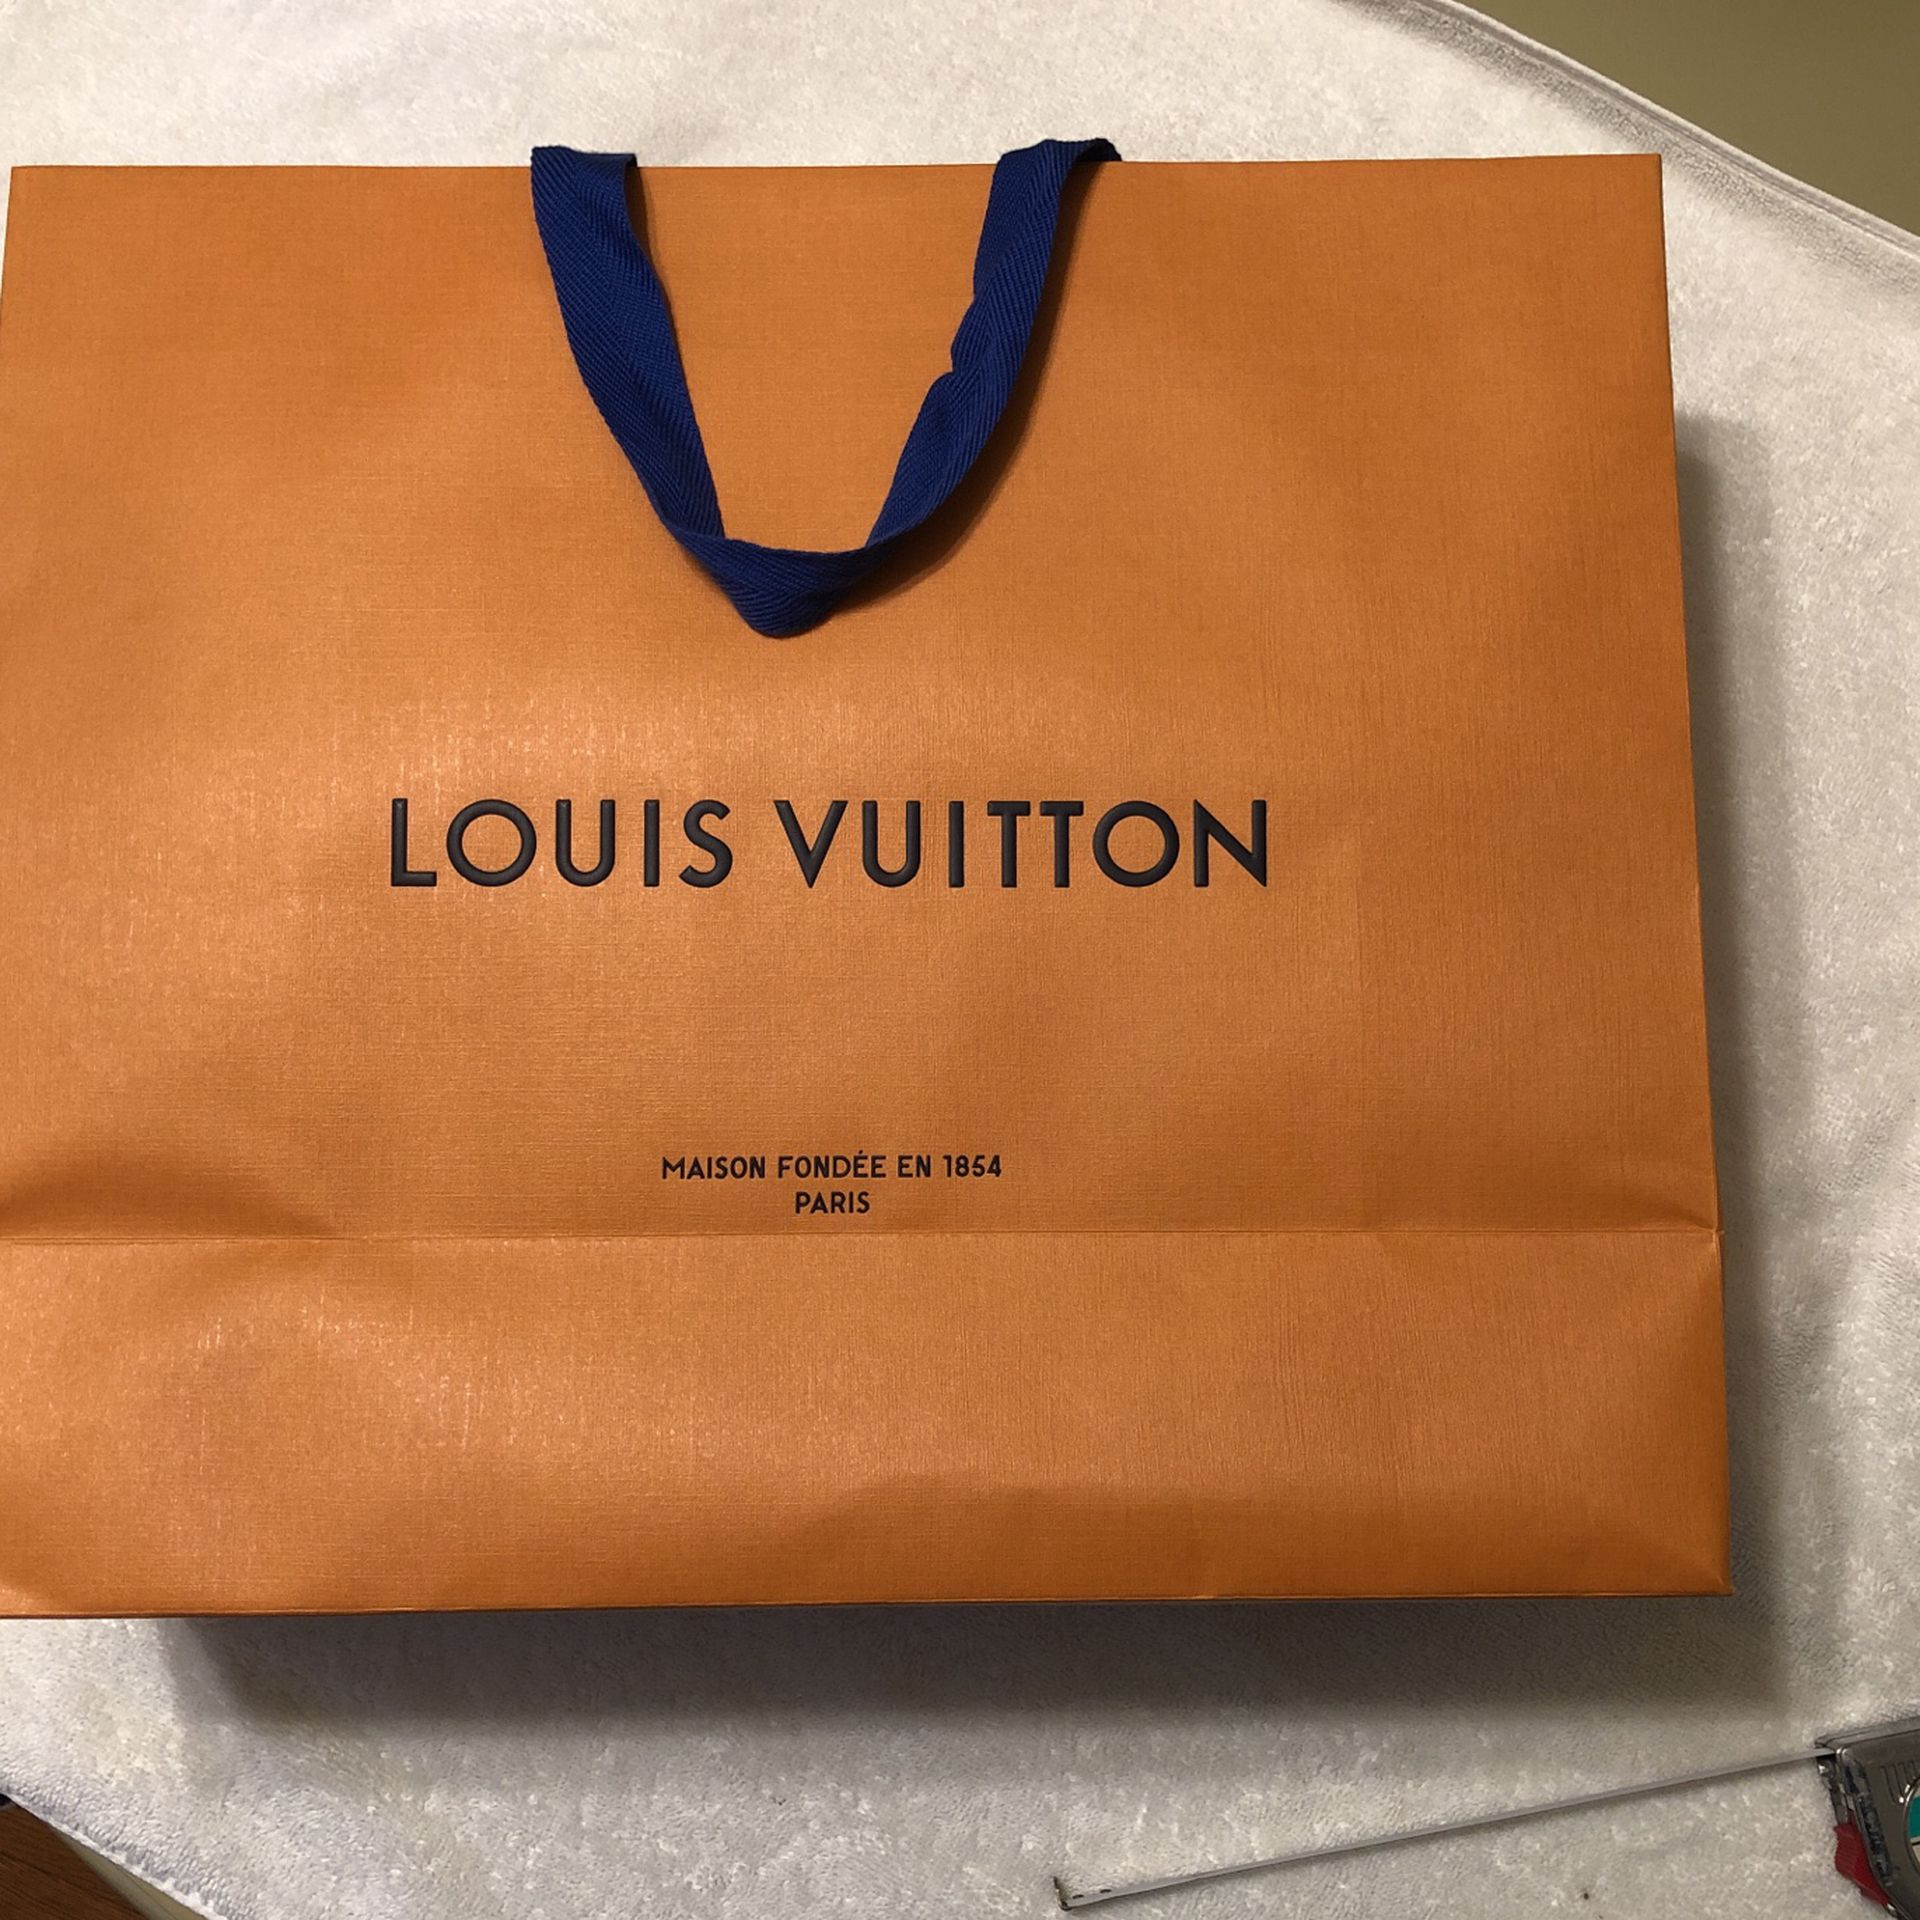 Authentic Louis Vuitton Sneakers for Sale in Santa Monica, CA - OfferUp